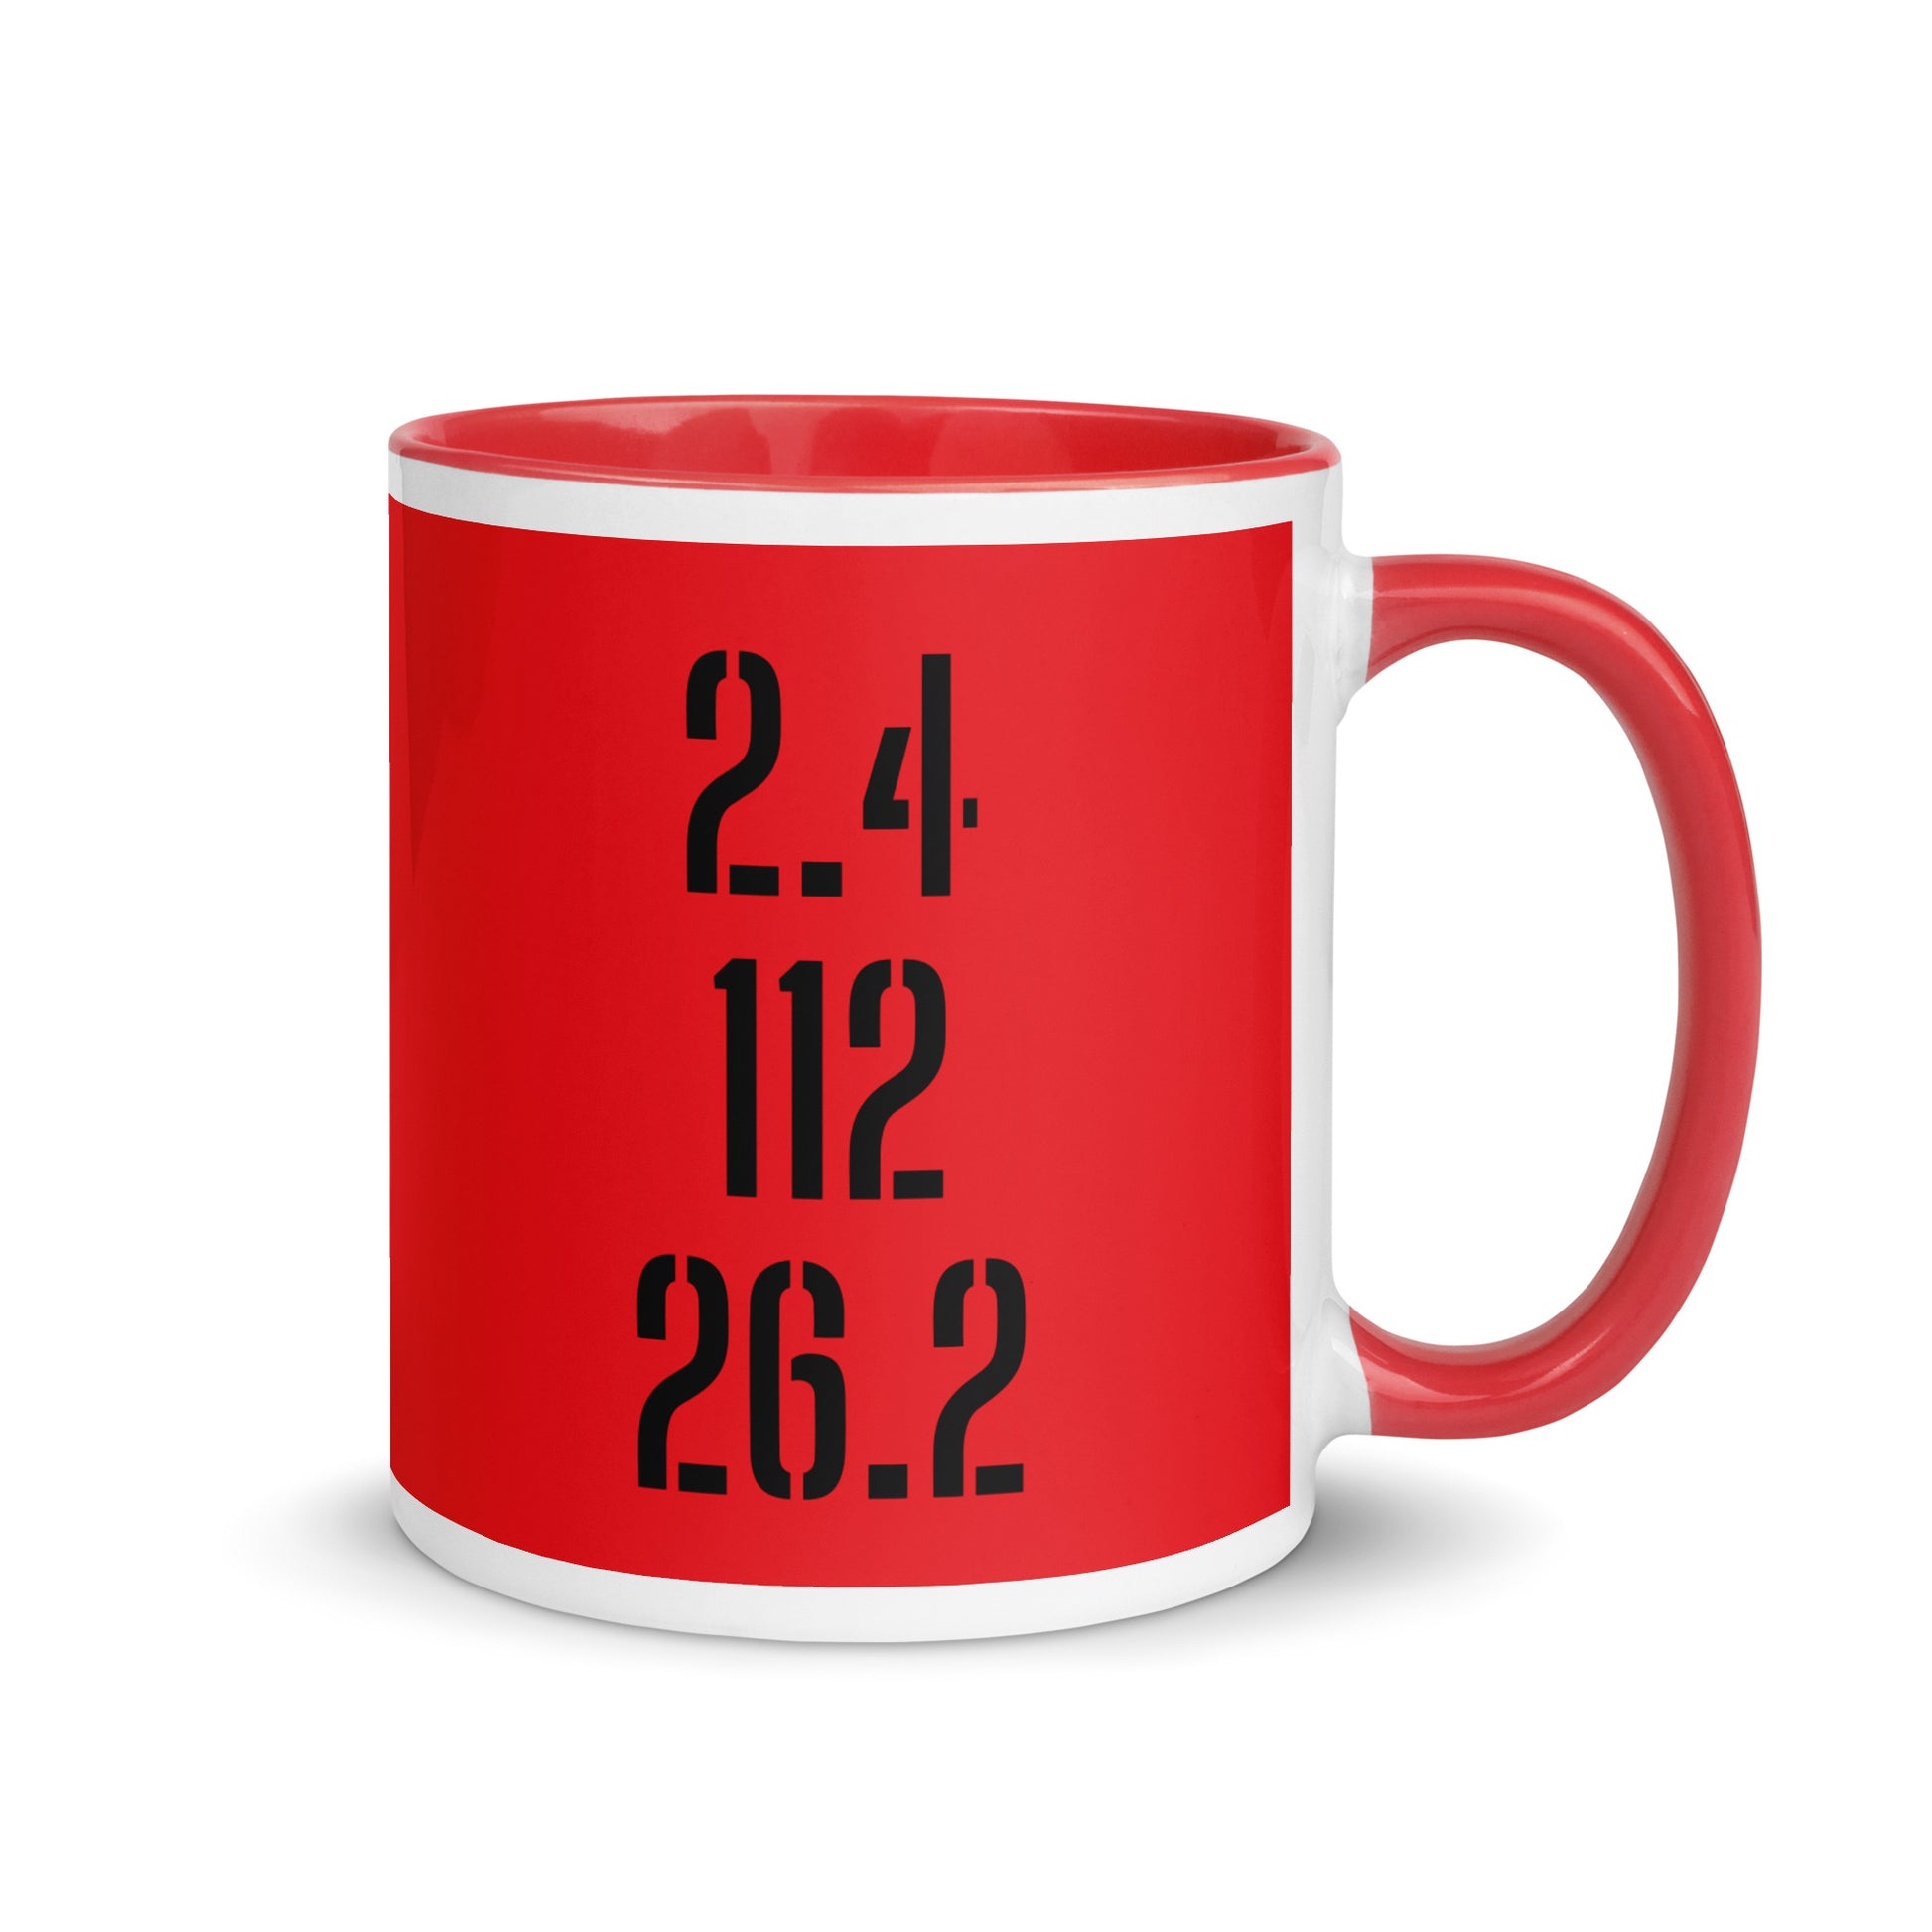 red and white mug with 2.4, 112 and 26.2 iron man distances in a black font